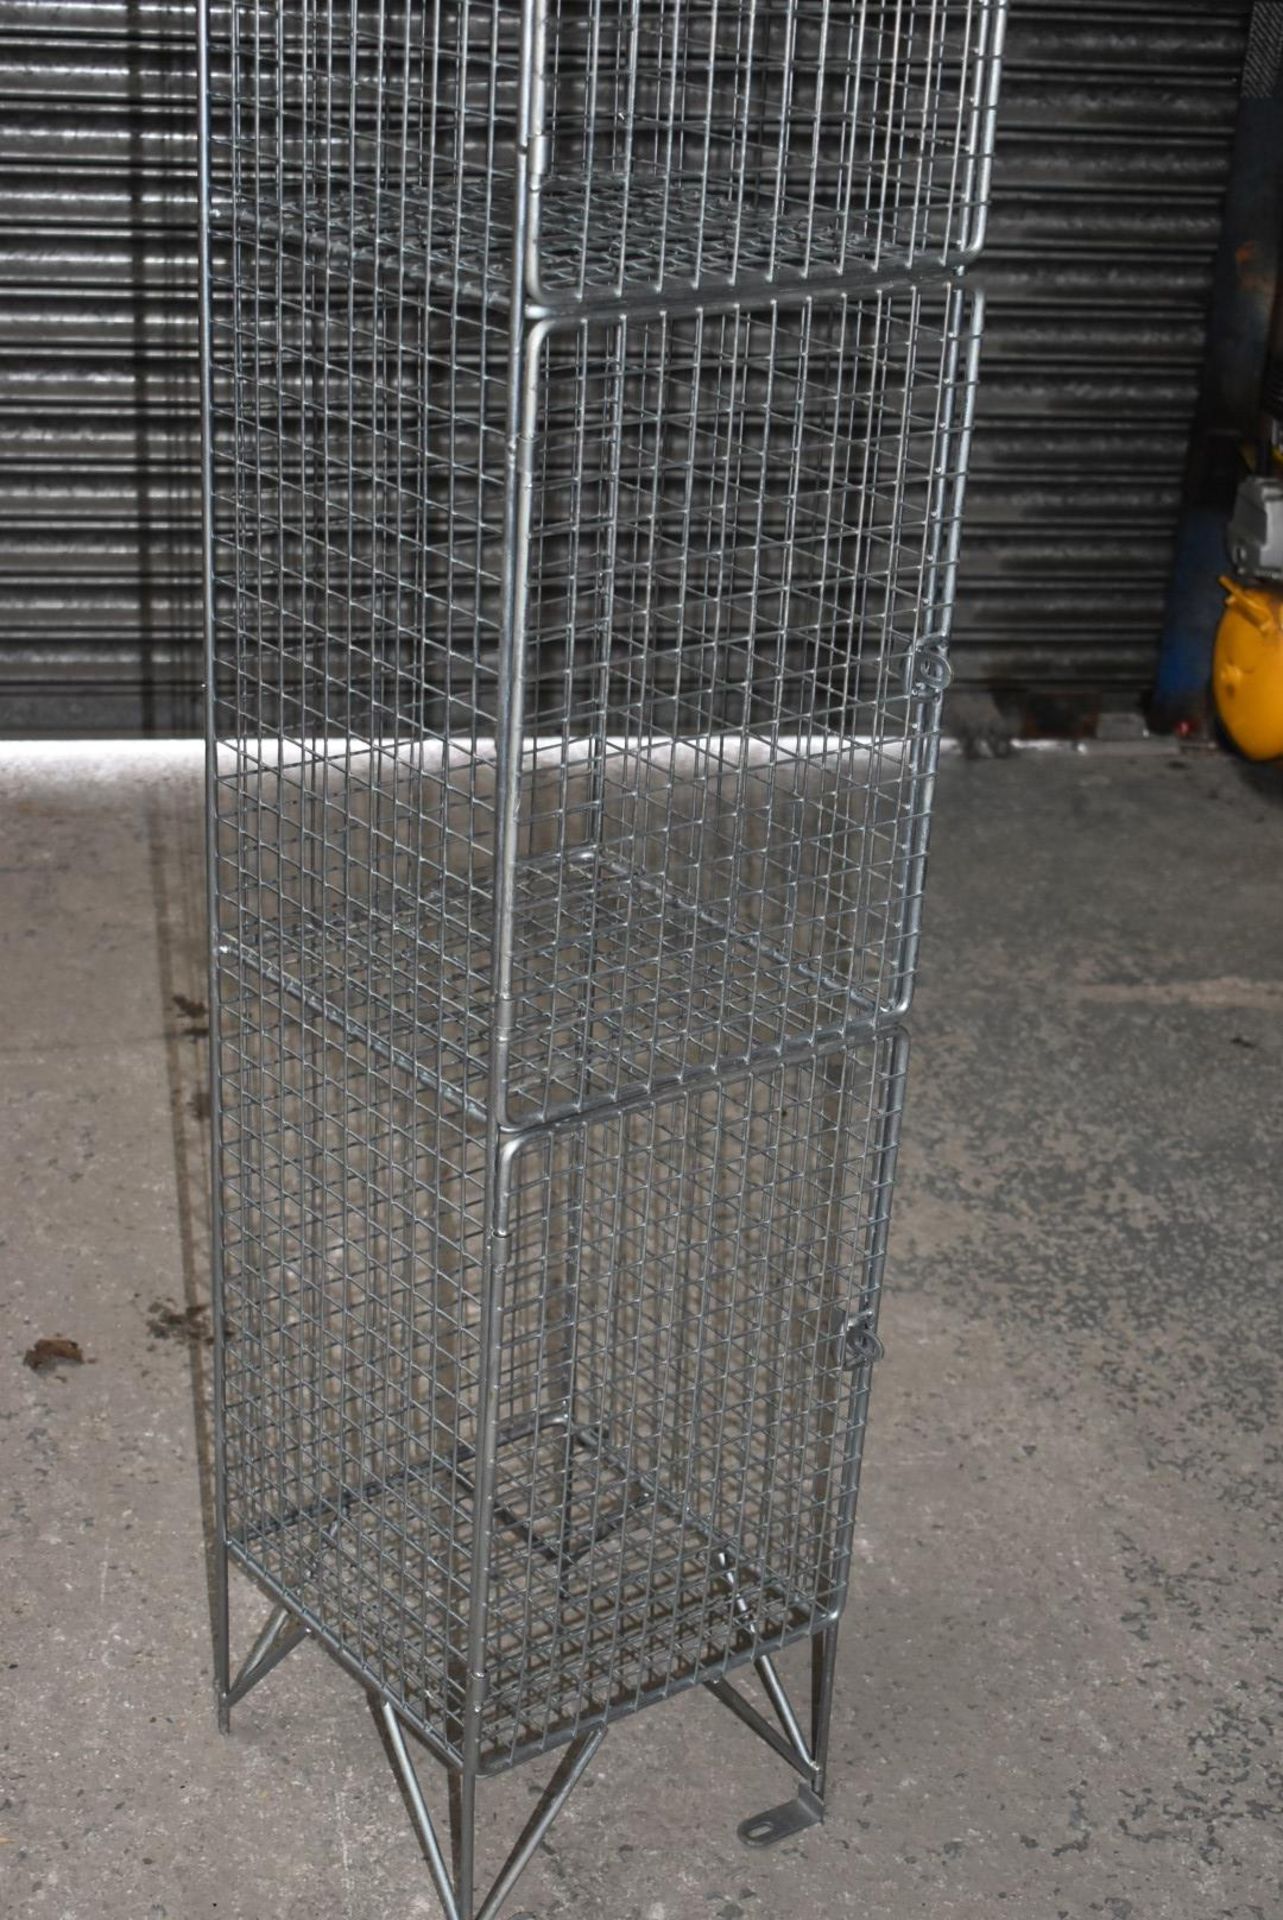 1 x Wire Mesh Cage Lockers With Four Locker Compartments - Dimensions: H193 x W30 x D32 cms - Ref: - Image 6 of 11